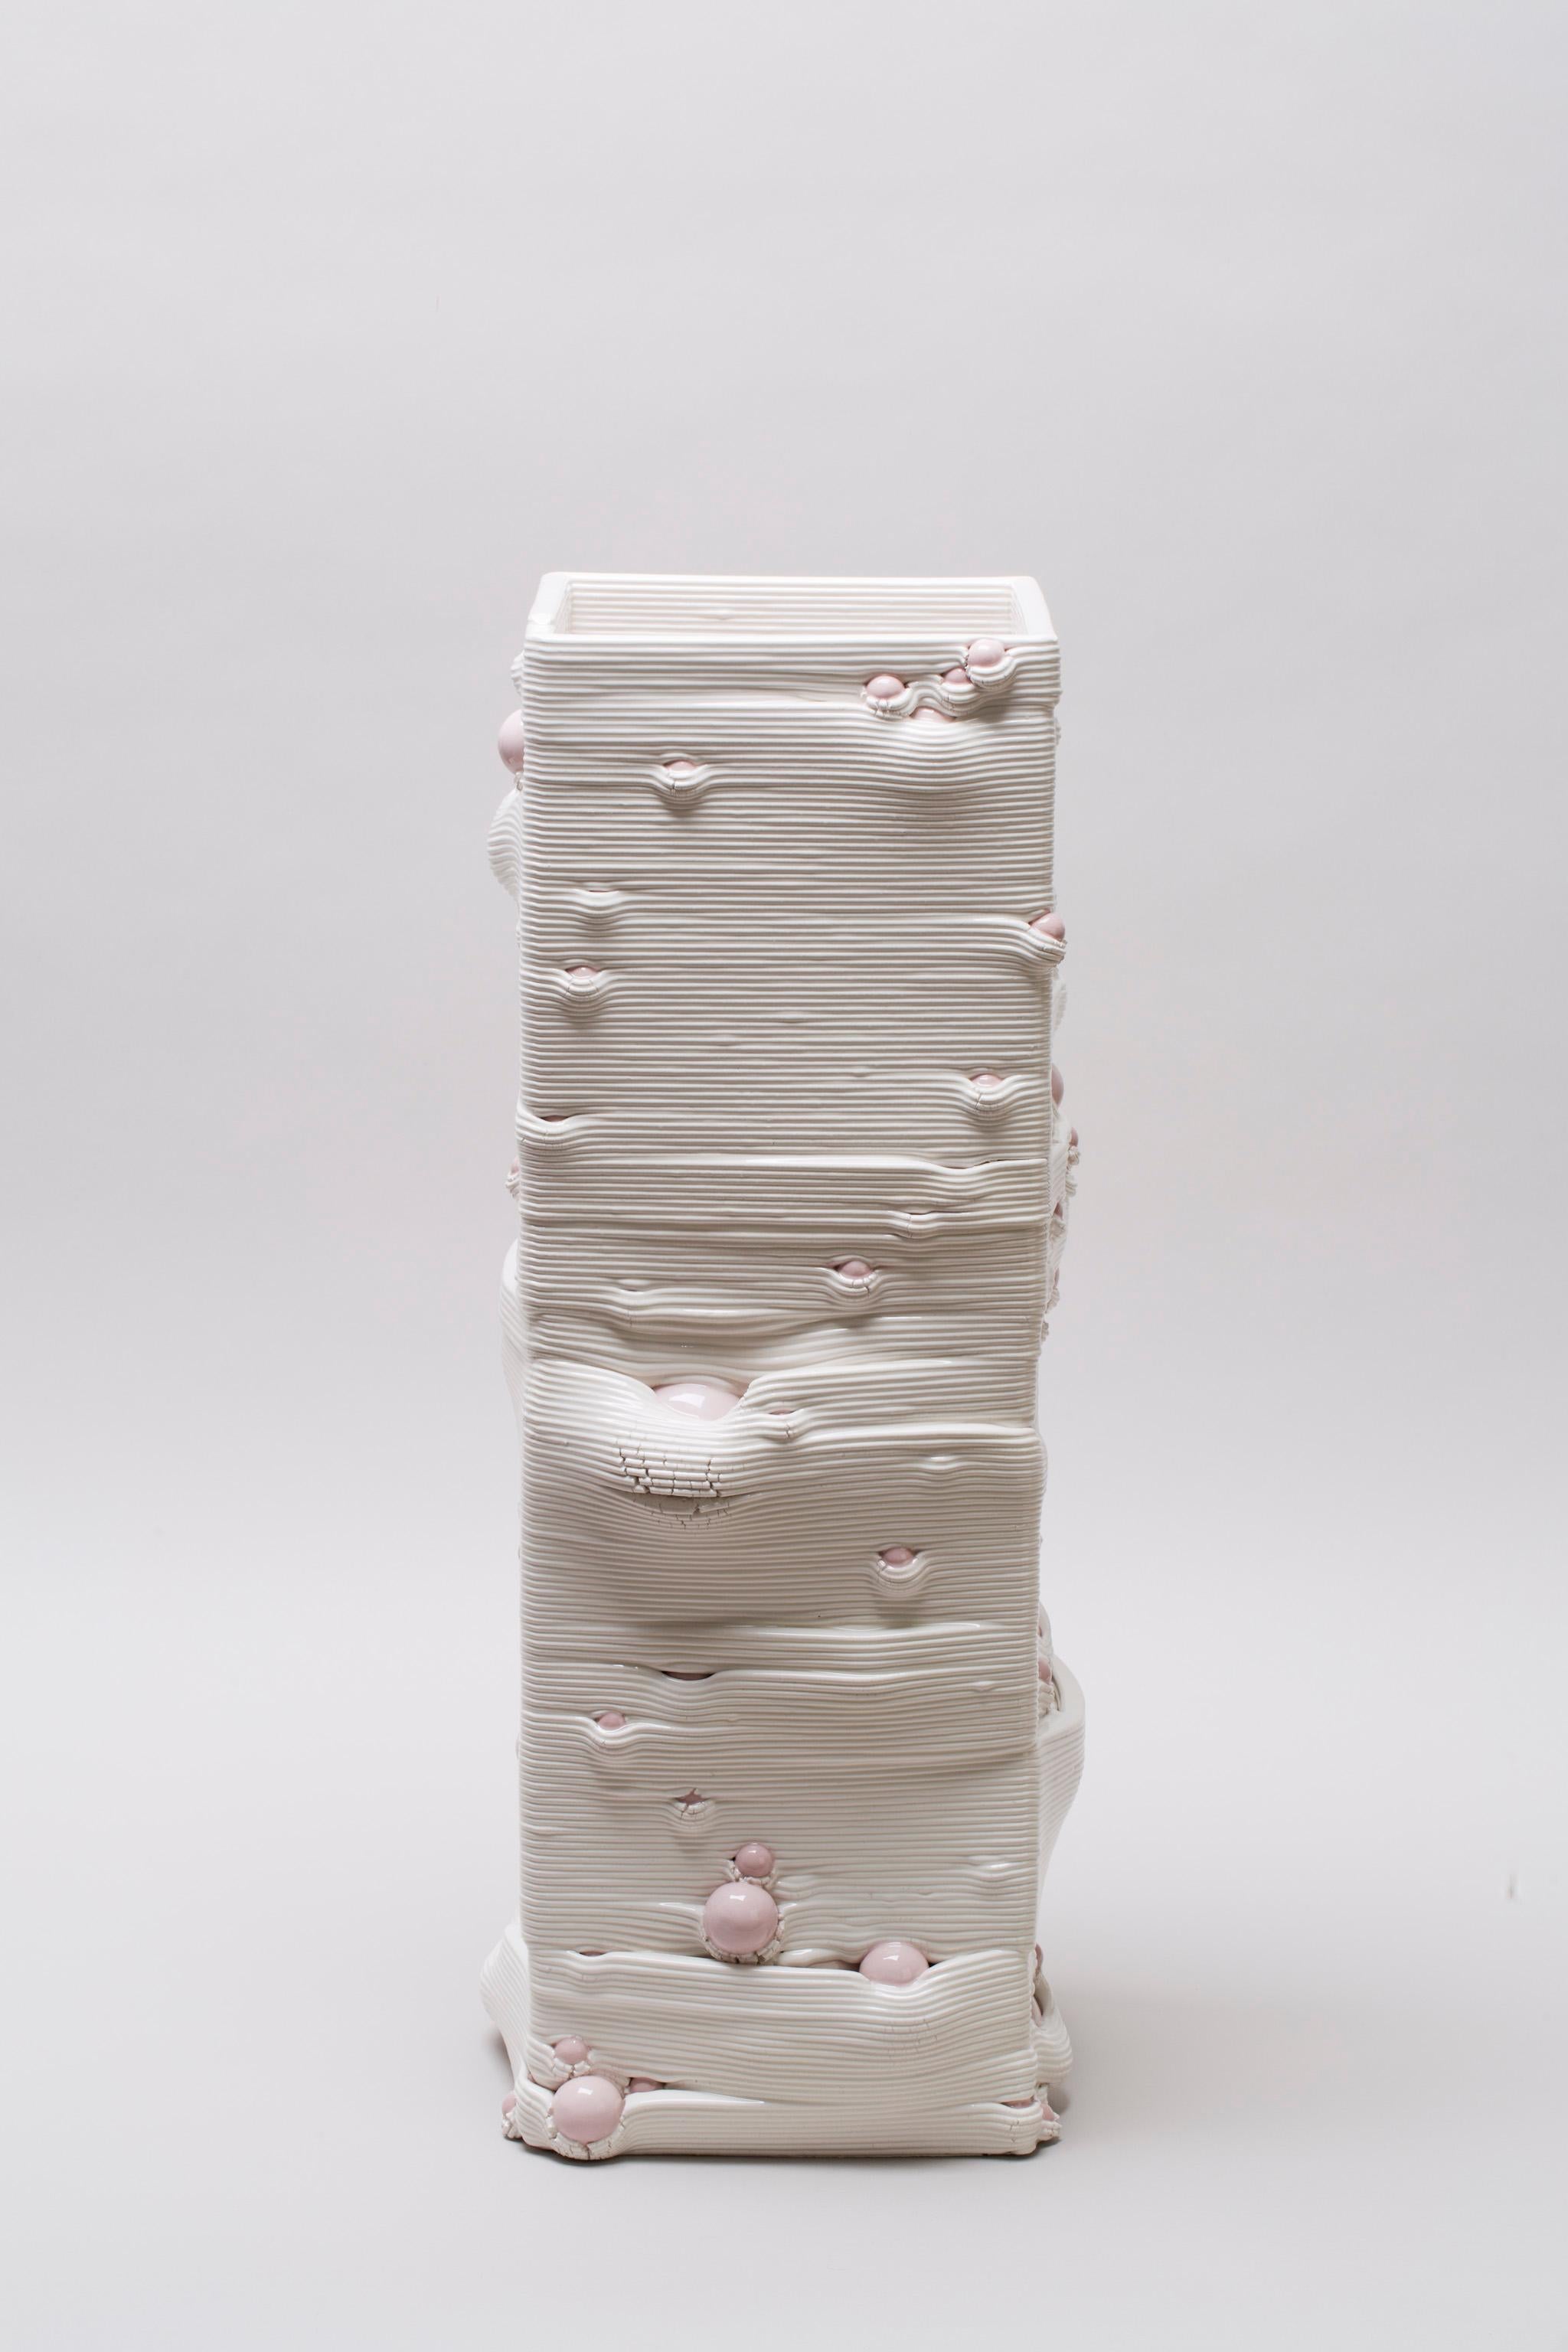 White 3D Printed Ceramic Sculptural Vase Italy Contemporary, 21st Century For Sale 10